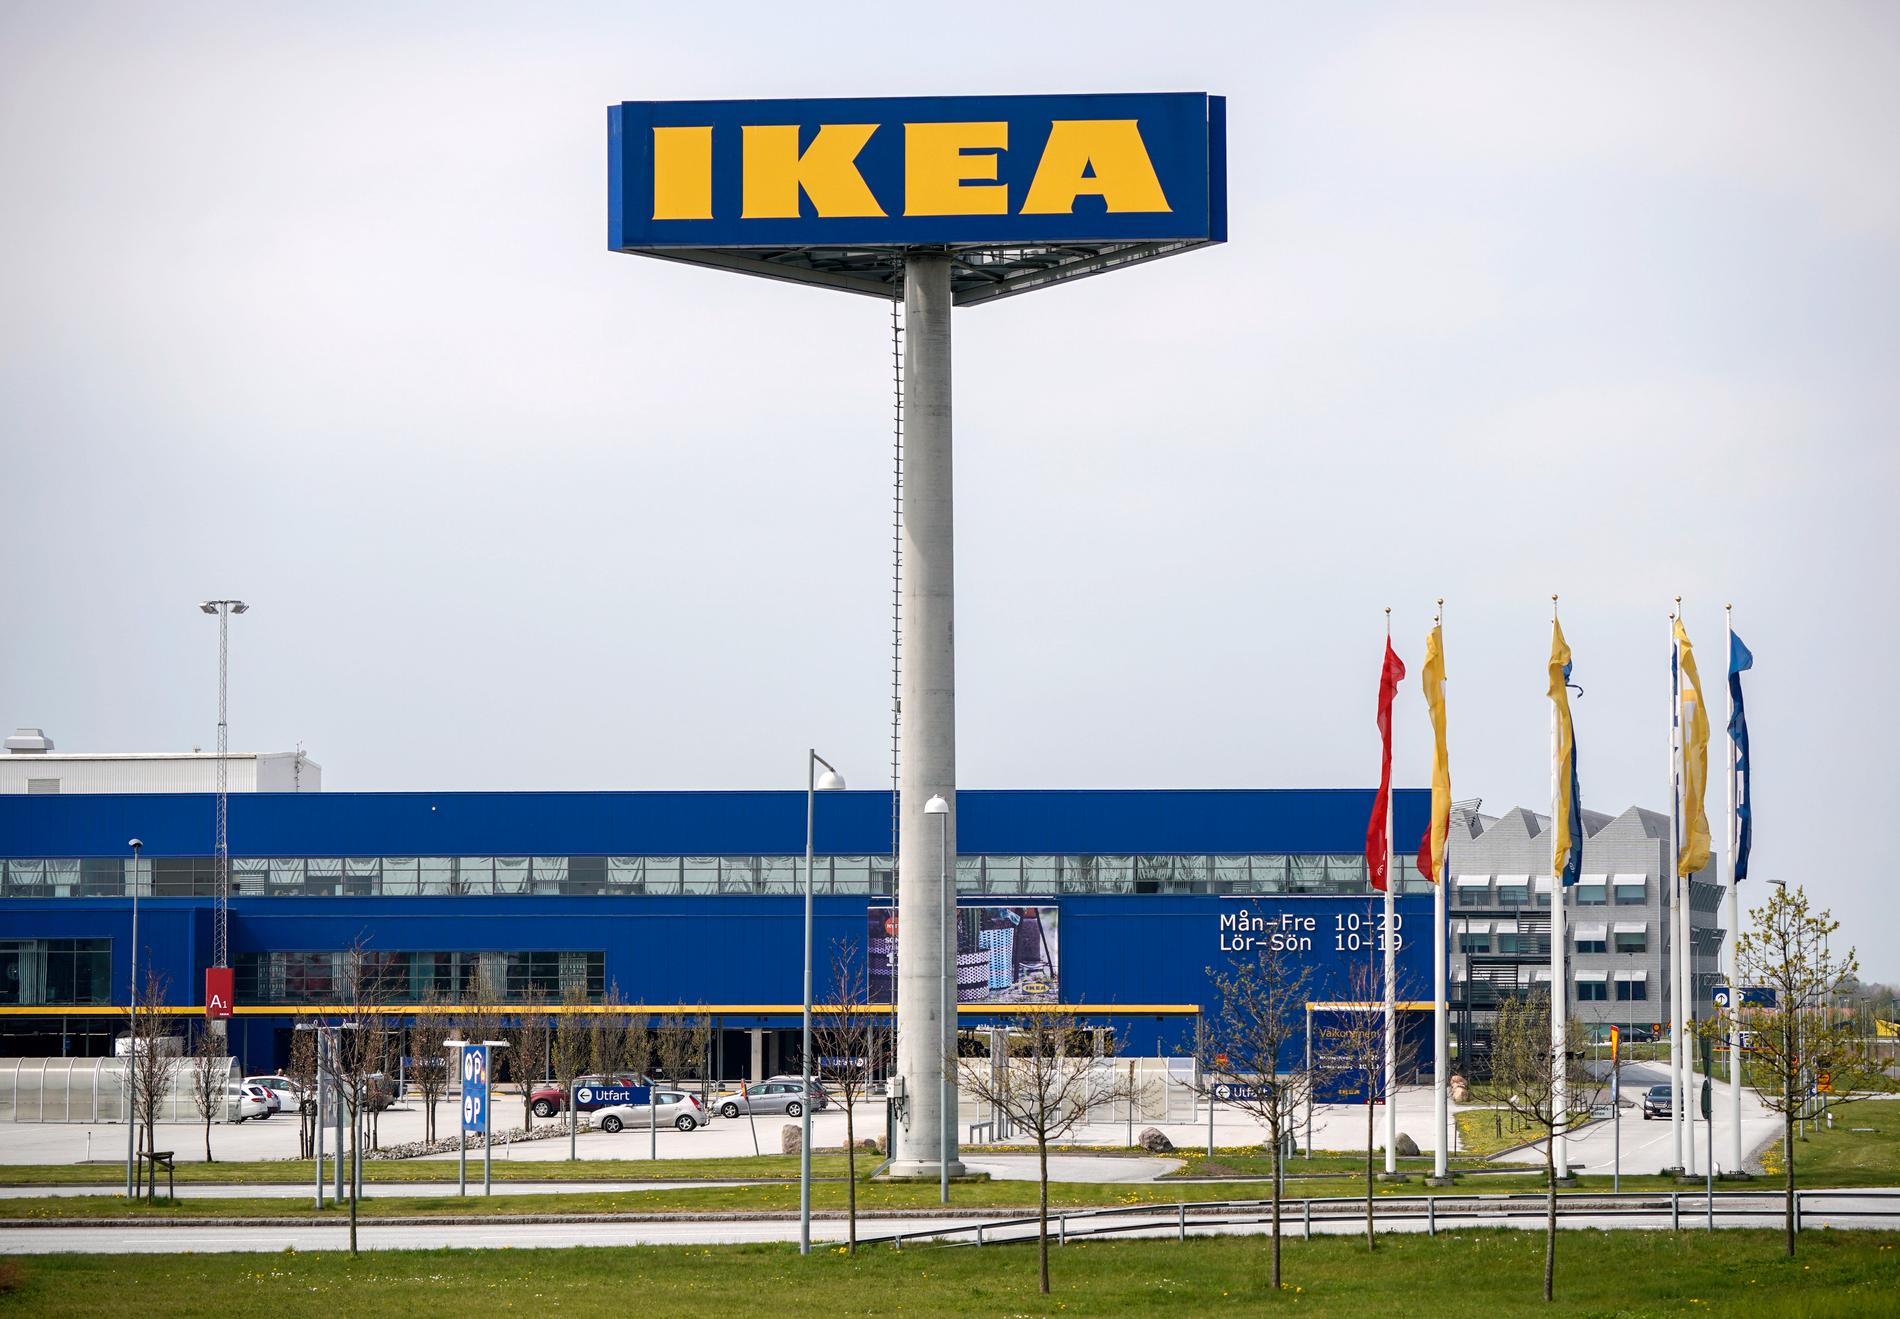 Ikea sets the price of sausage in Sweden – E24